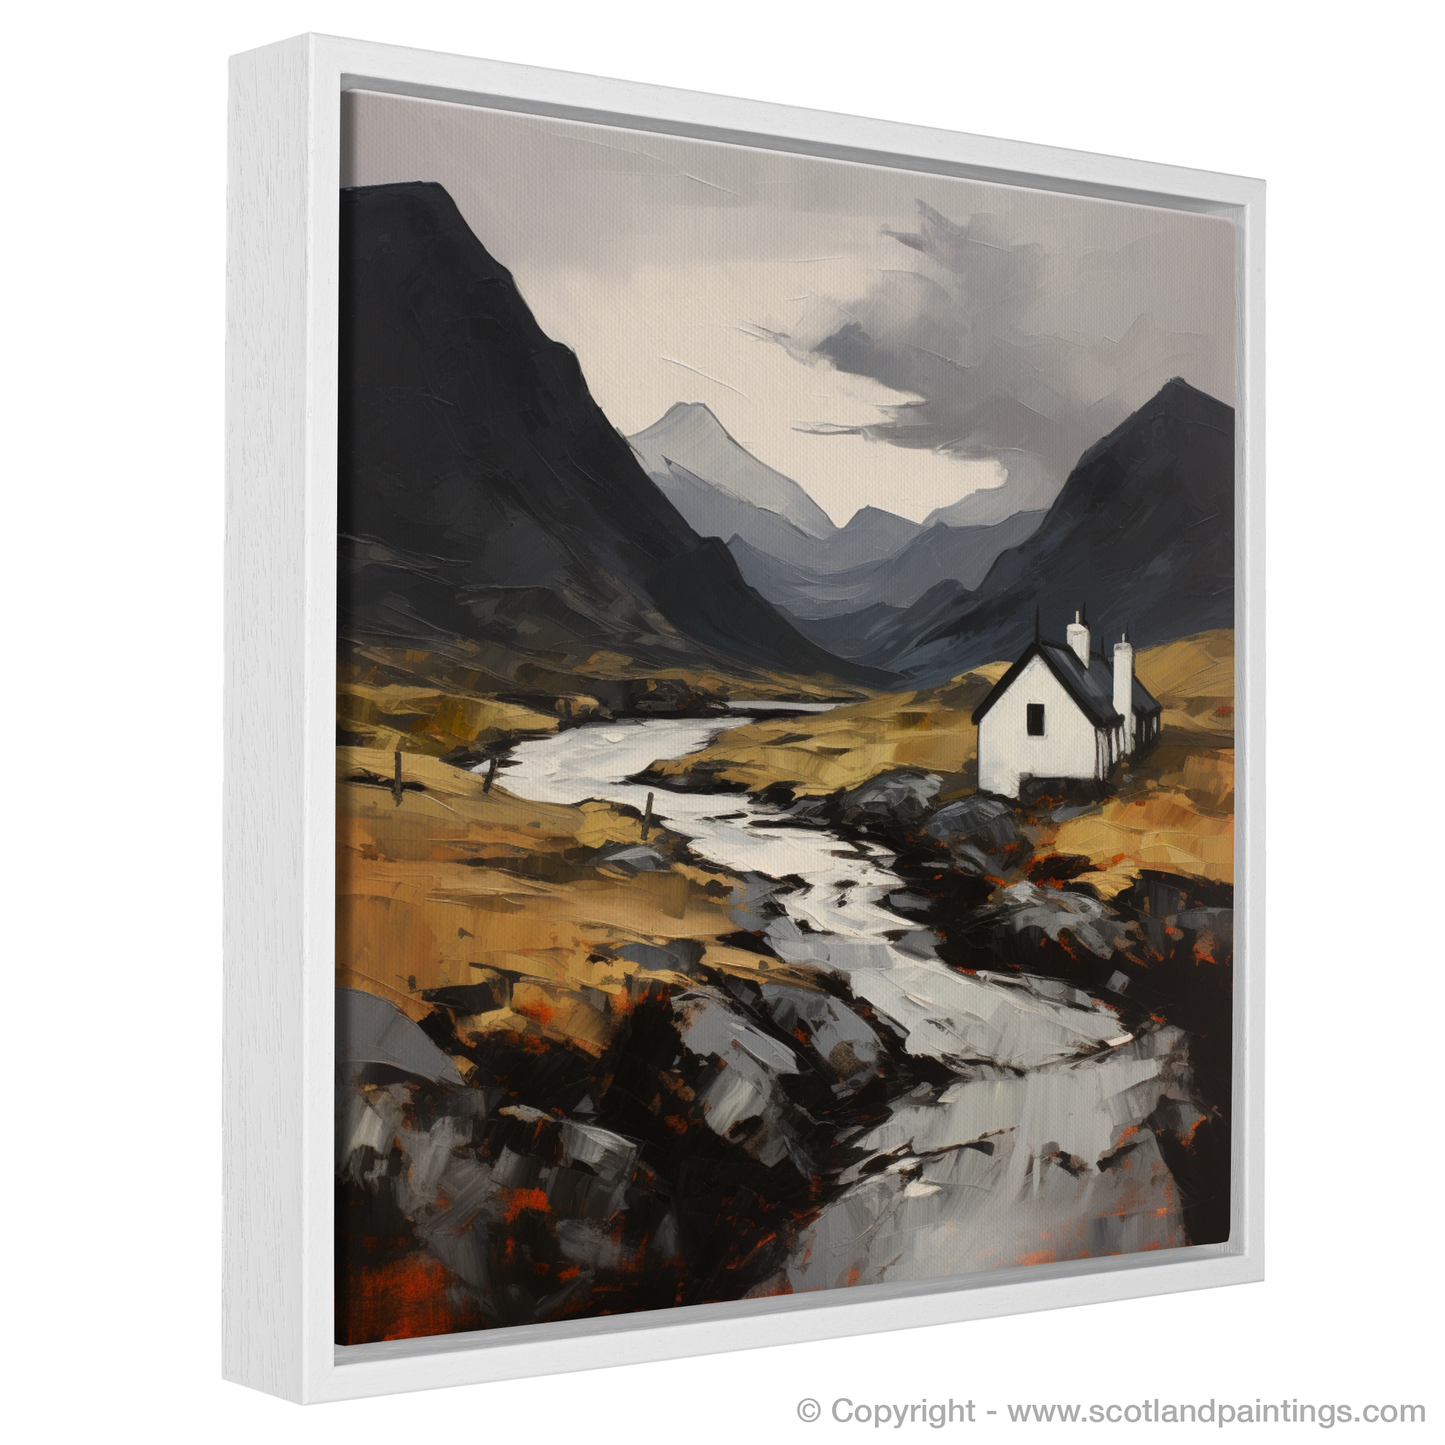 Painting and Art Print of Creag Leacach entitled "Majestic Wilds of Creag Leacach: An Expressionist Ode".